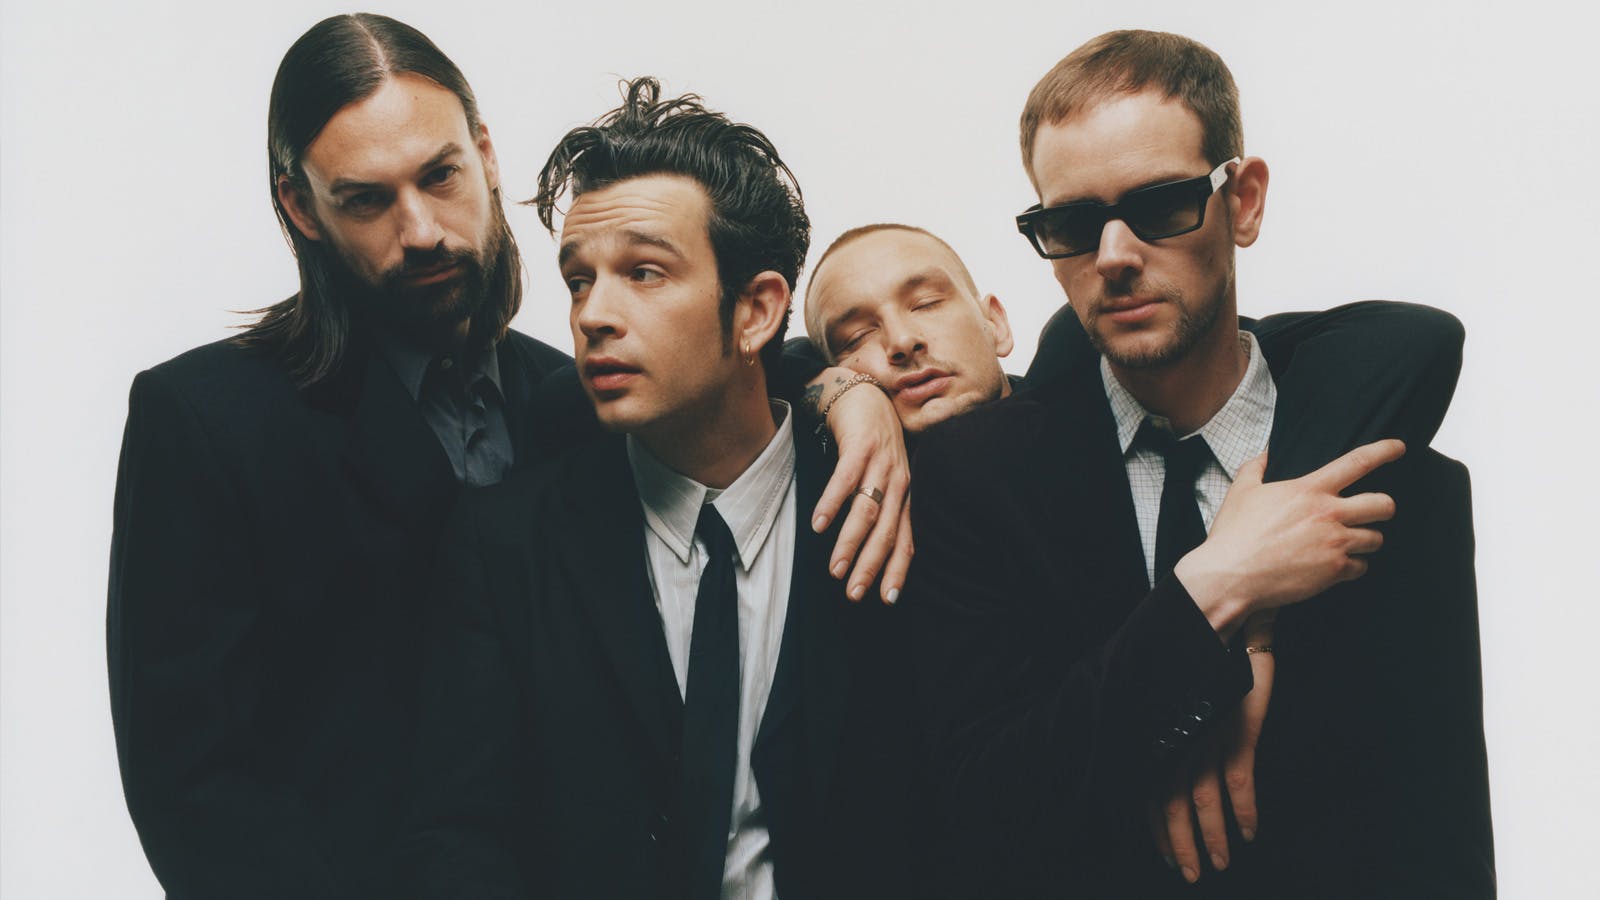 THE 1975 – ALL YOU NEED TO KNOW AHEAD OF THE SHOW